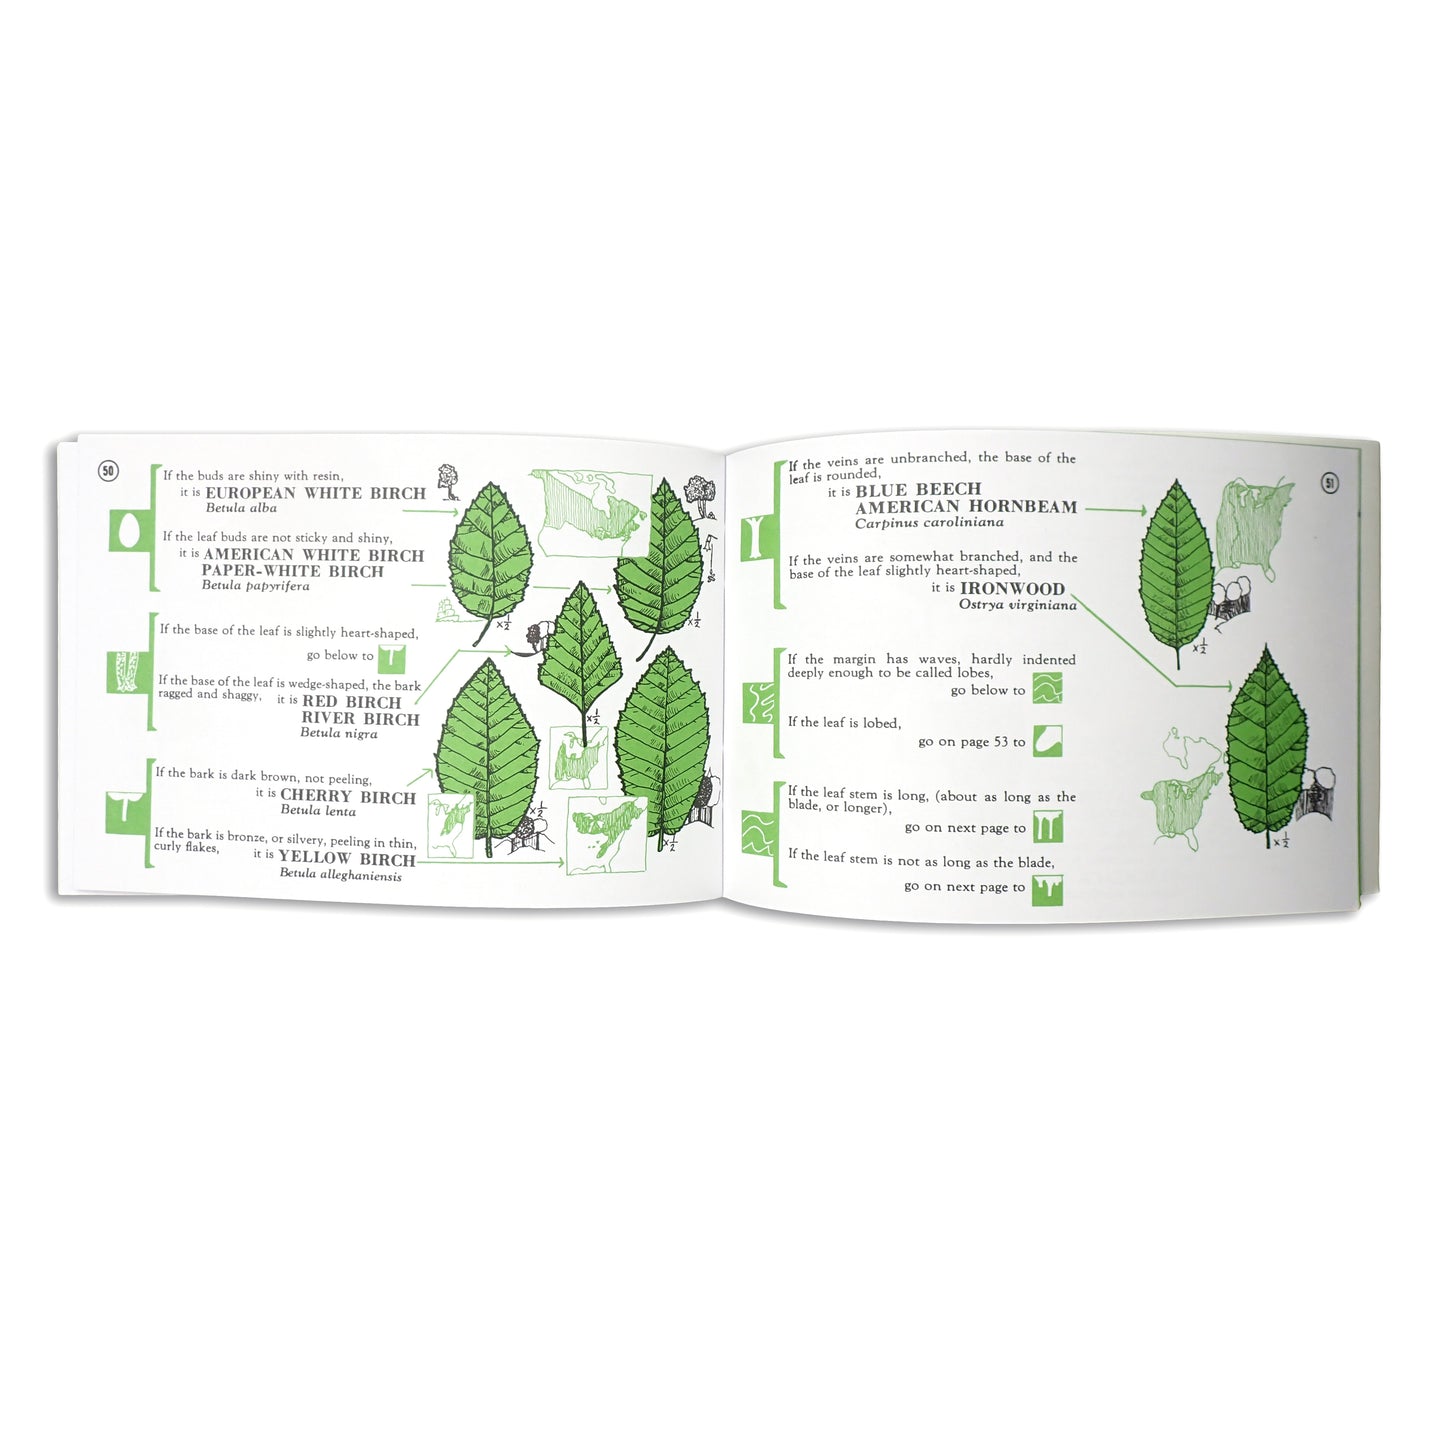 Tree Finder: A Manual for the Identification of Trees by Their Leaves - May Theilgaard Watts